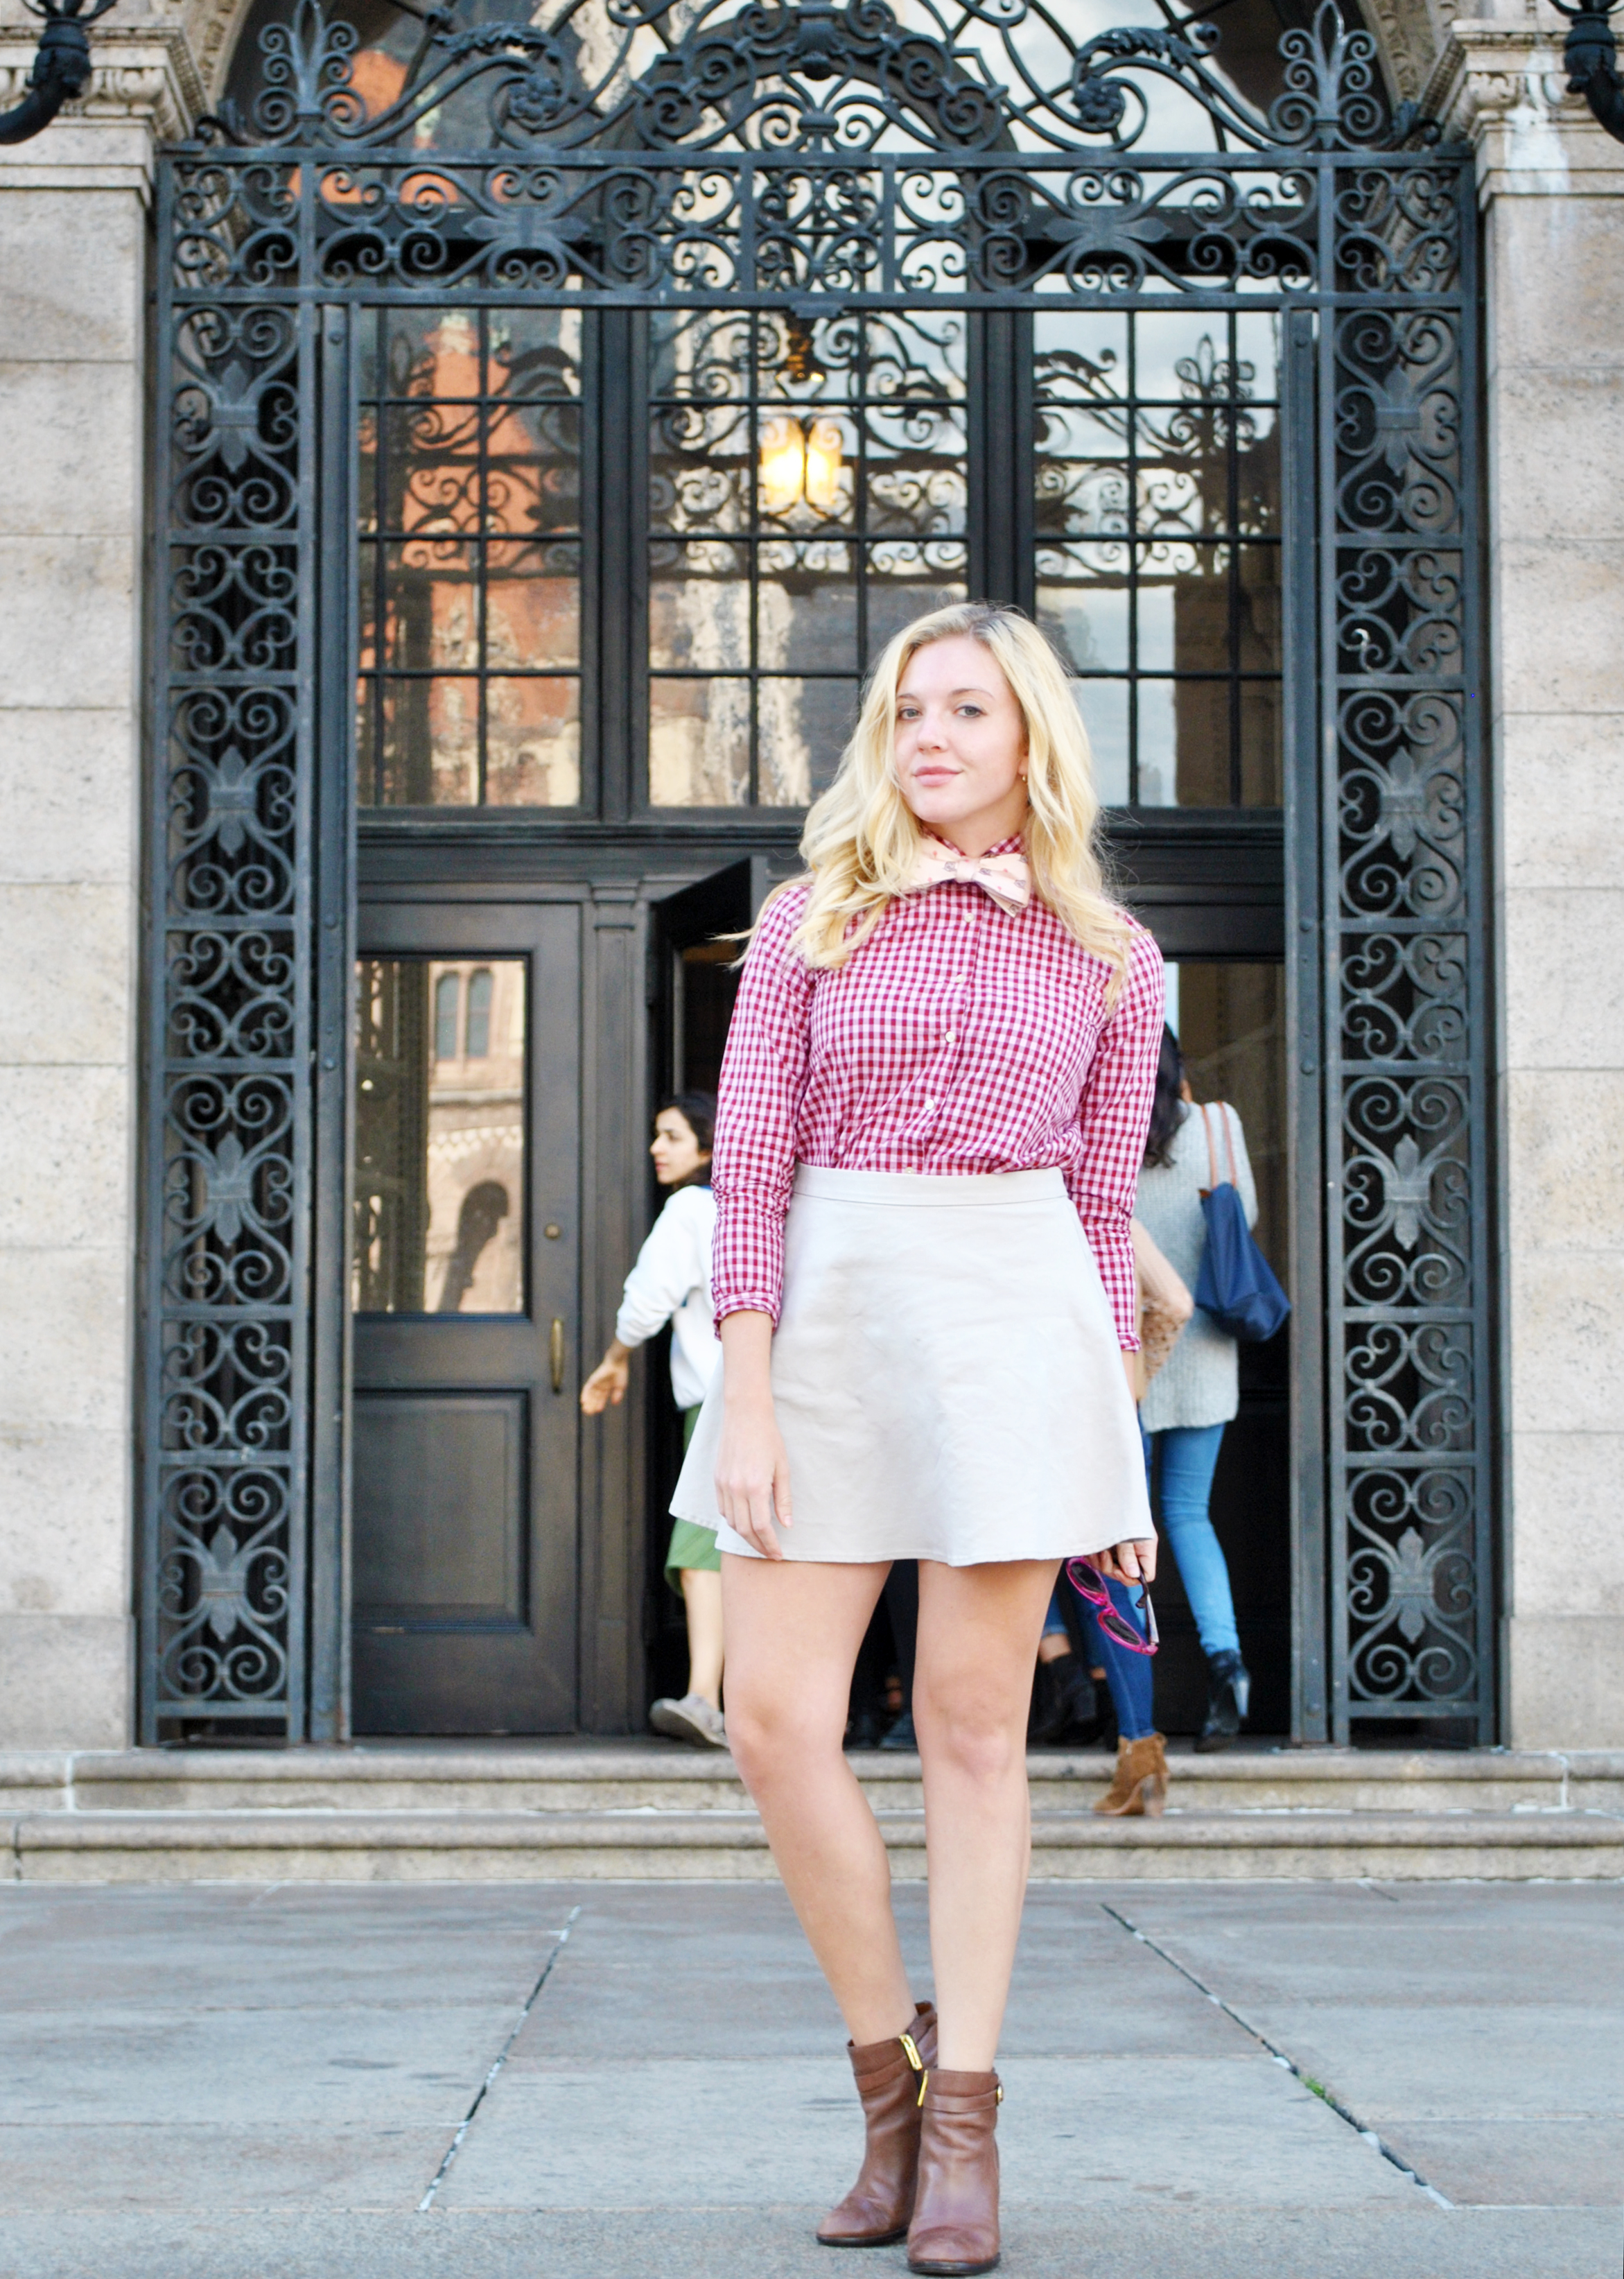 thoughtfulwish | oootie // bow tie // copley // boston // fblog // fashion blogger // preppy // fall outfit // meredith wish